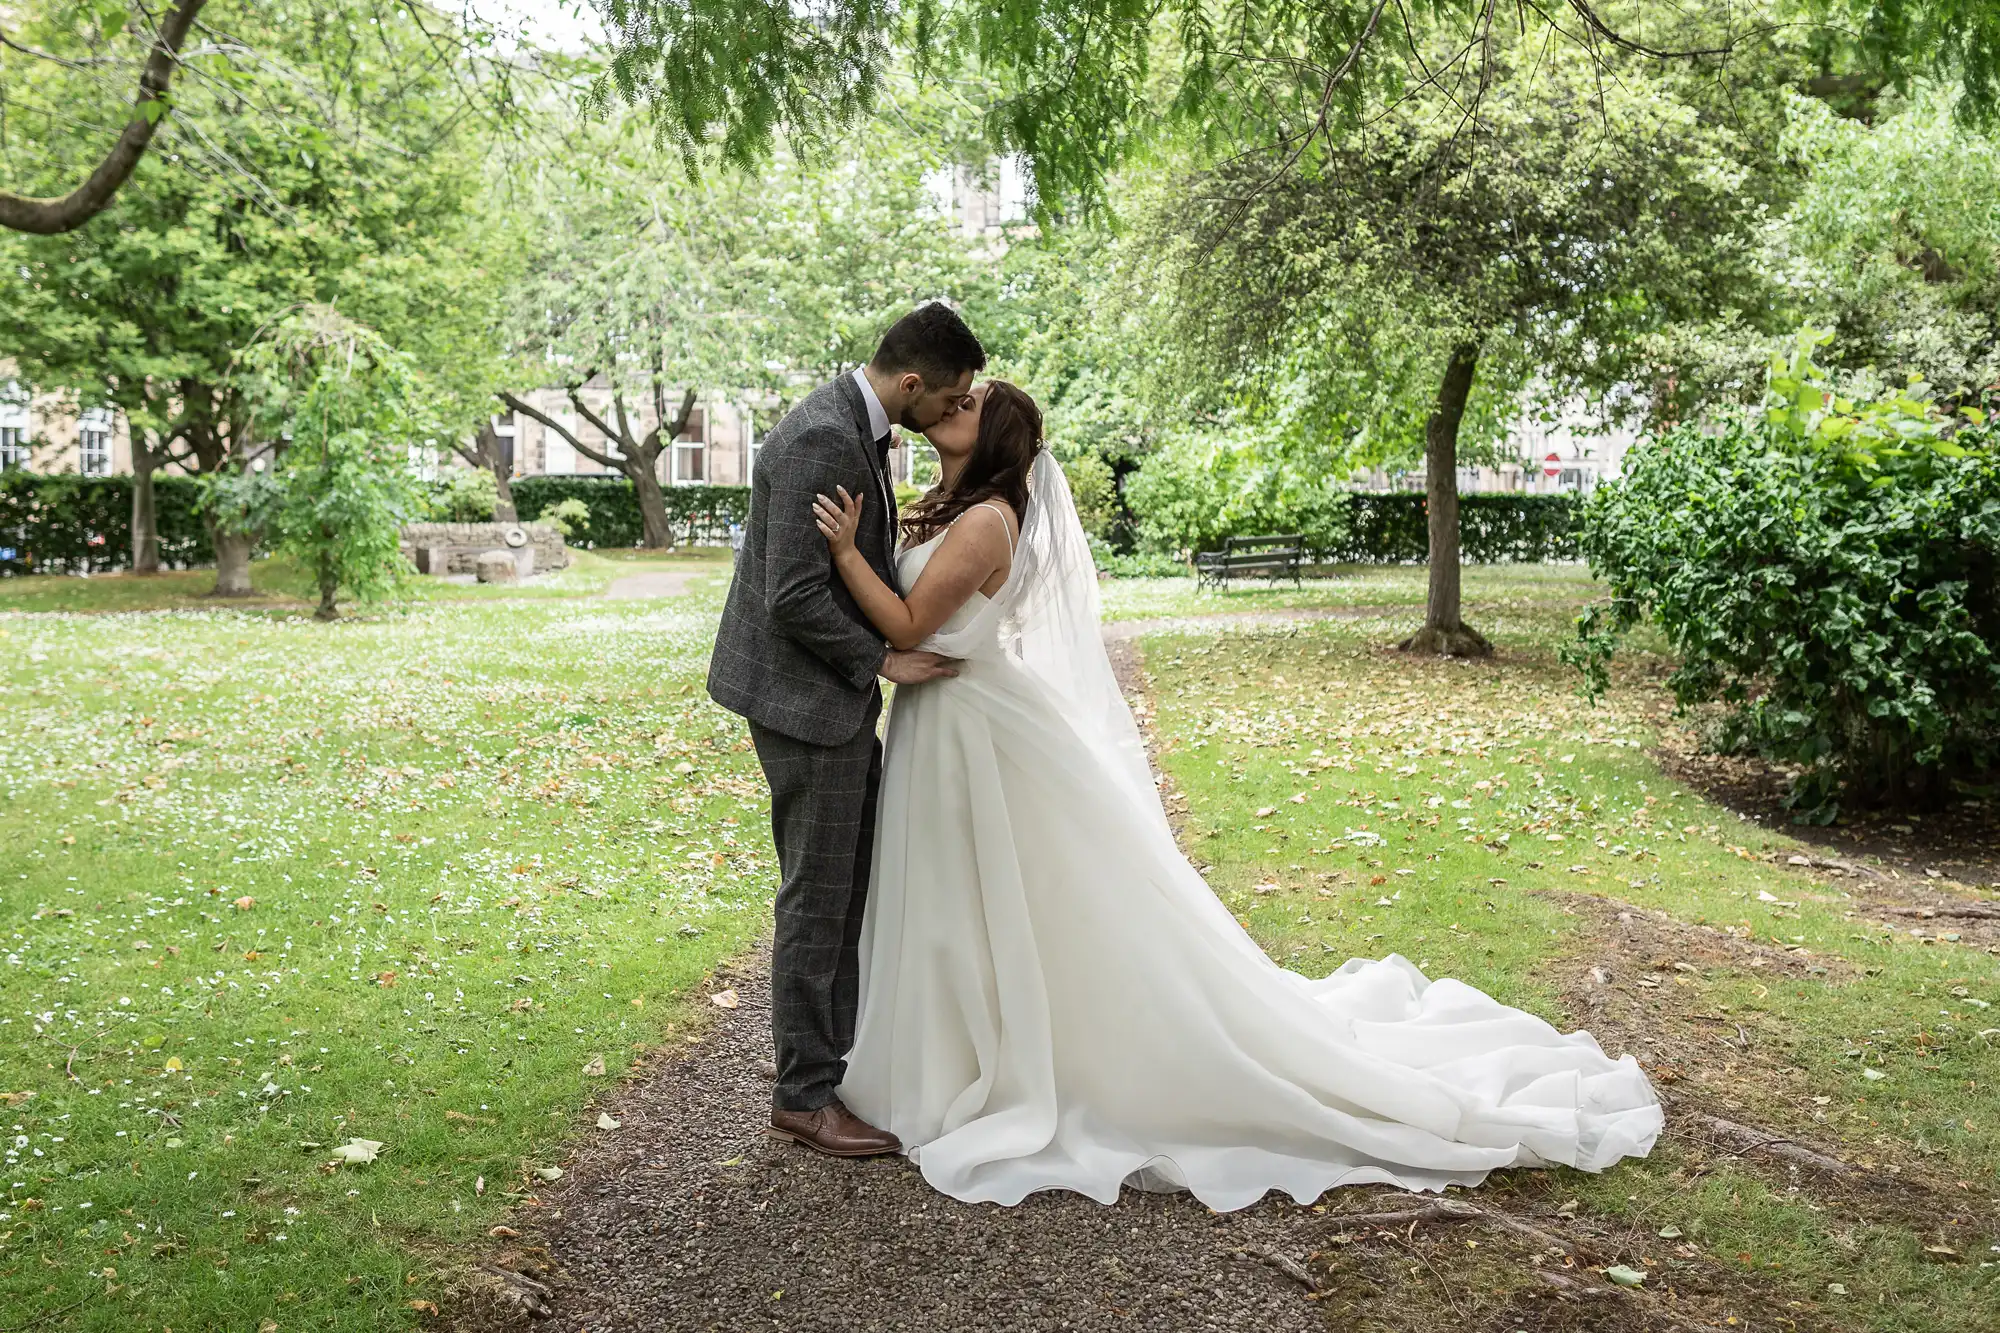 A bride and groom kissing in a lush garden, the bride in a long white dress with a train, and the groom in a gray suit.